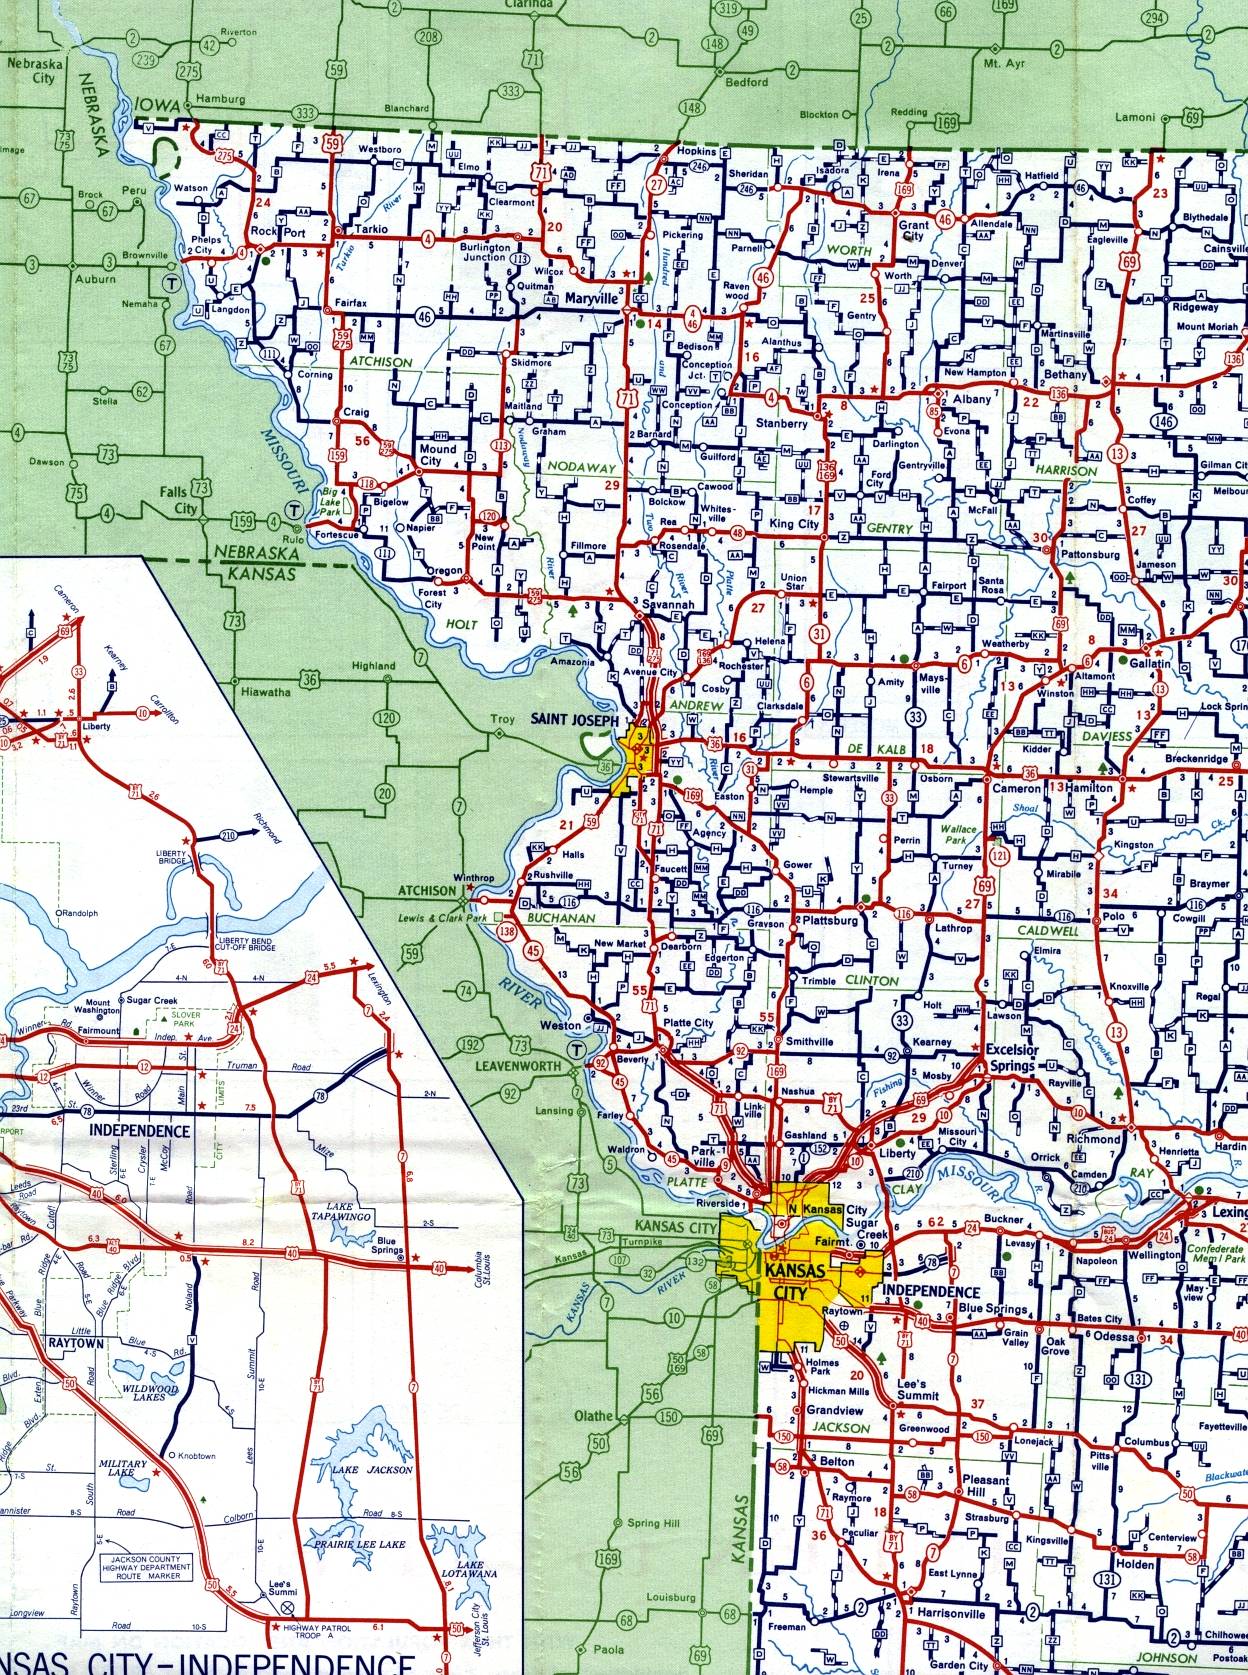 Northwest corner of Missouri from 1959 official highway map